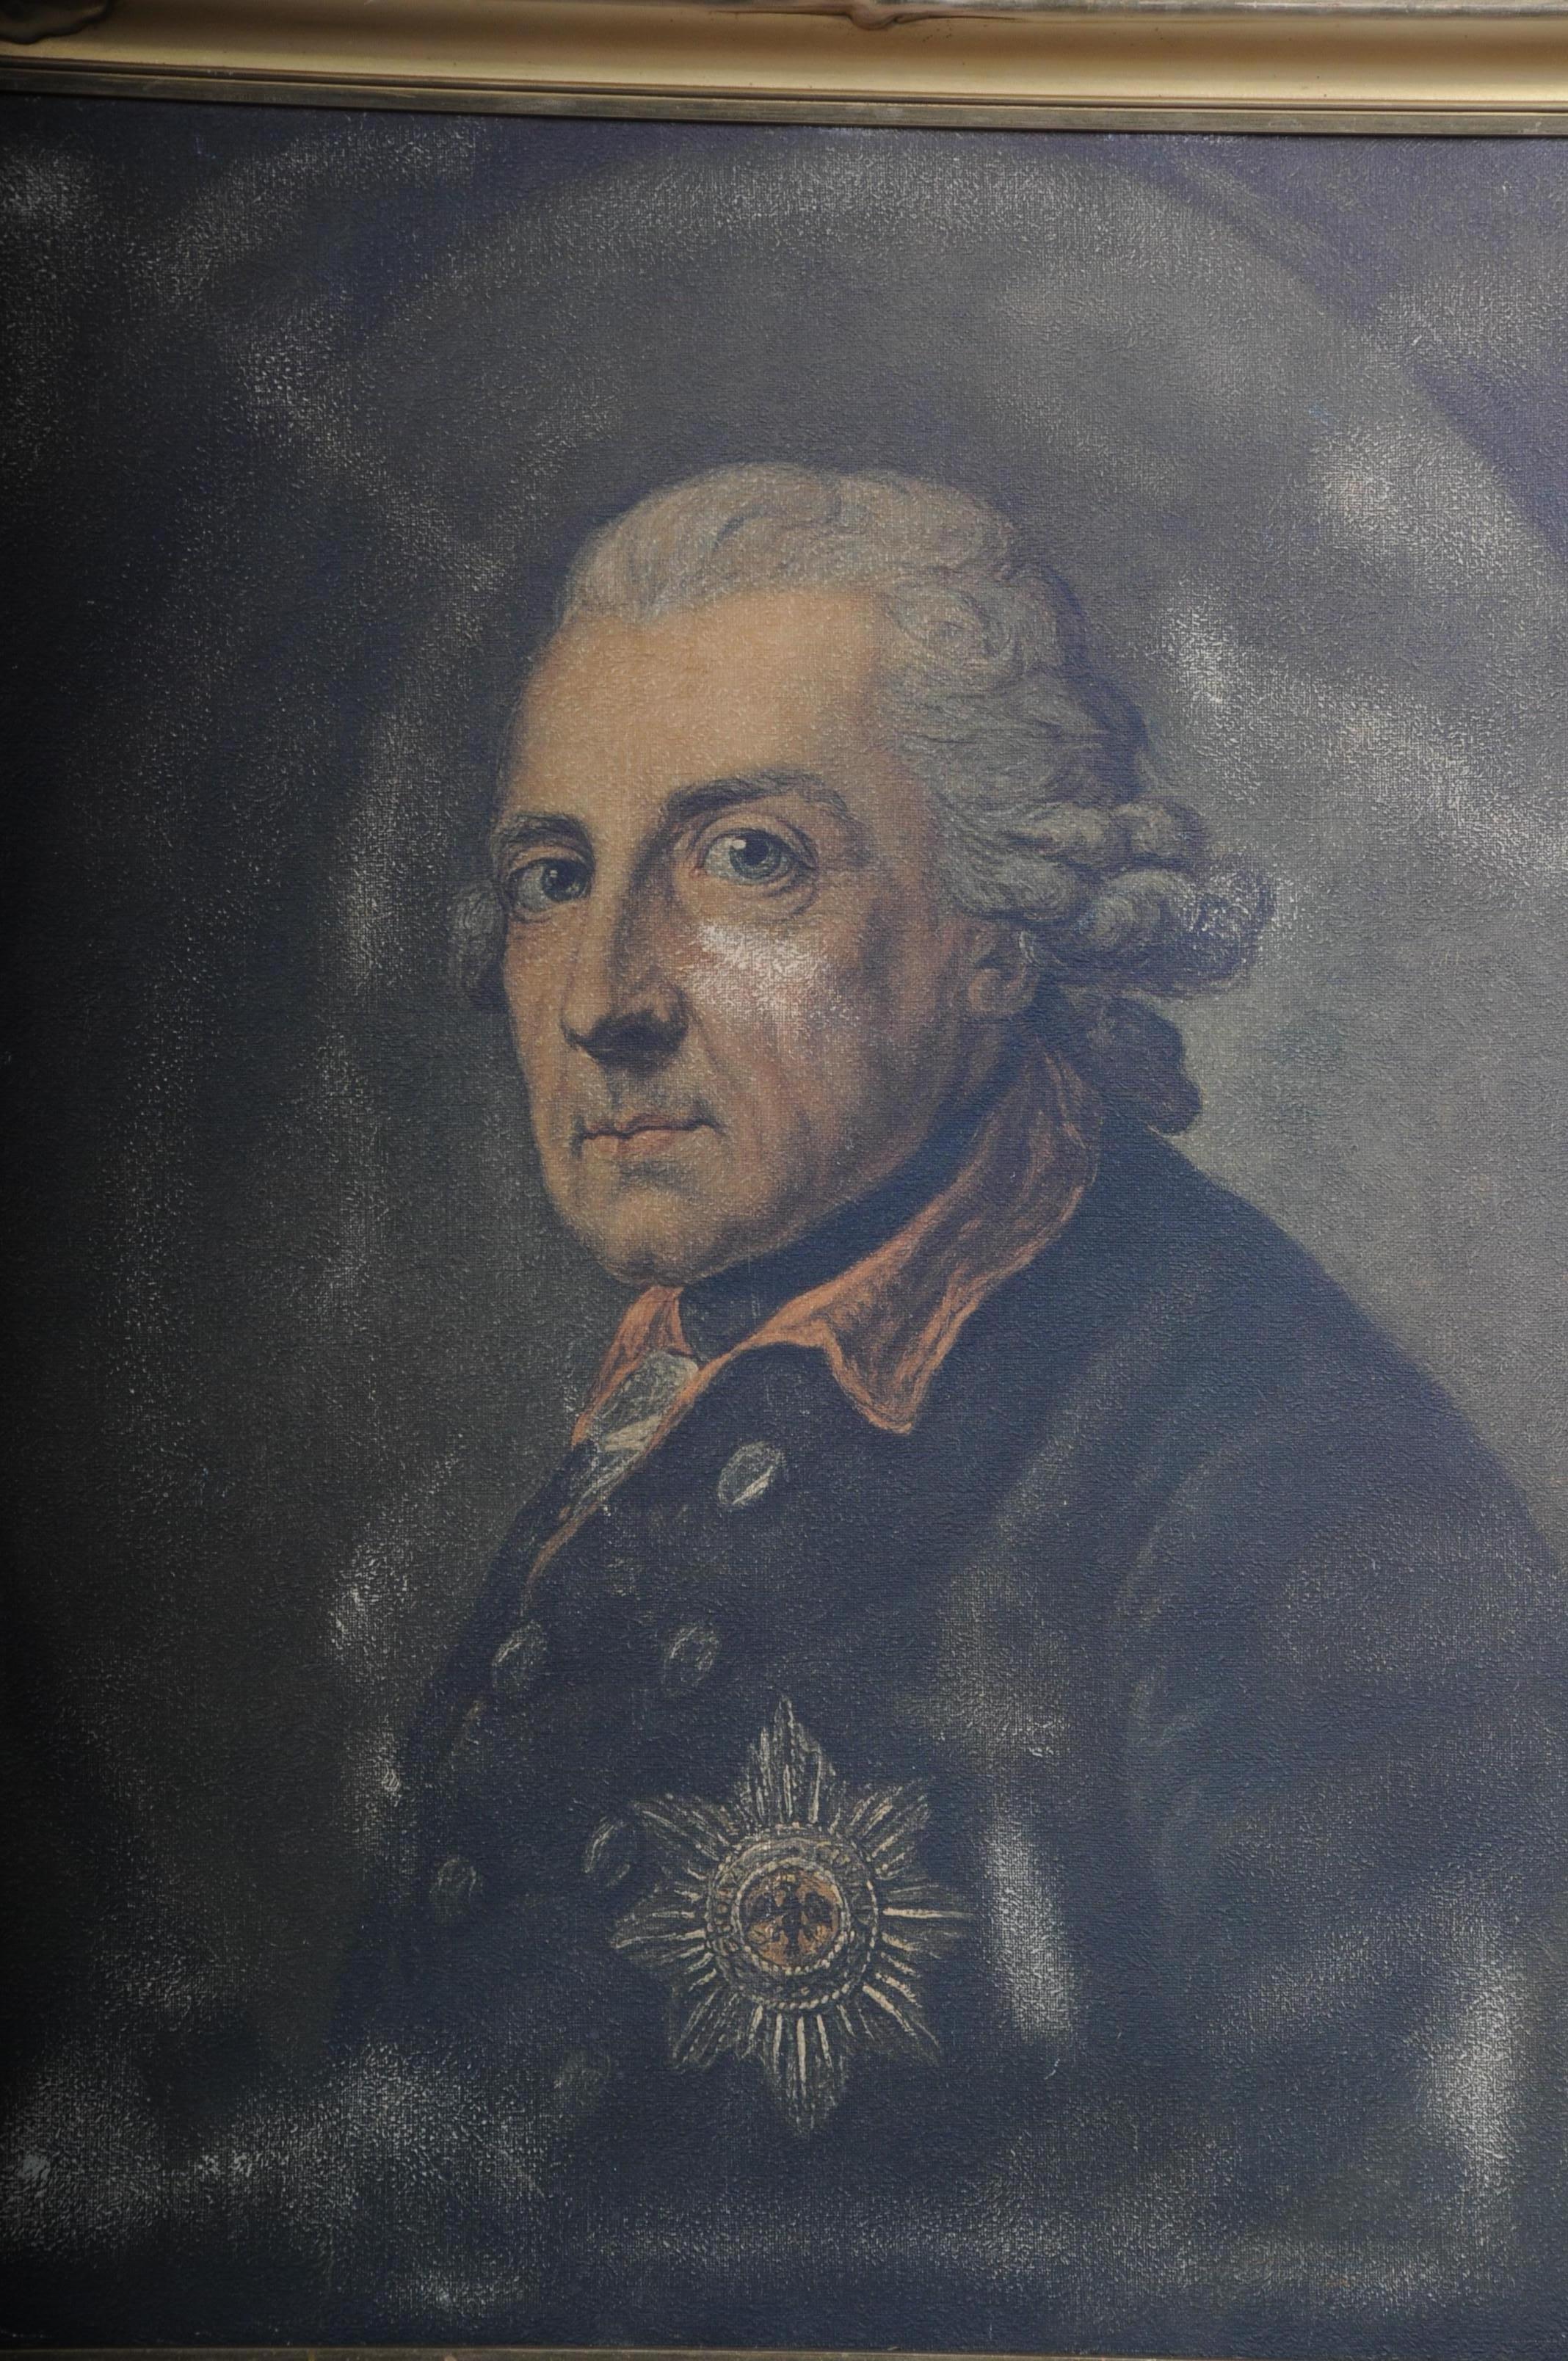 Painting Portrait of Fridrich II the Great 20th century after A. Graff

Classic well-known portrait painting of Frederick II the great after Anton Graff.
King Frederick II of Prussia, Frederick the great, portrait.

(S-219).